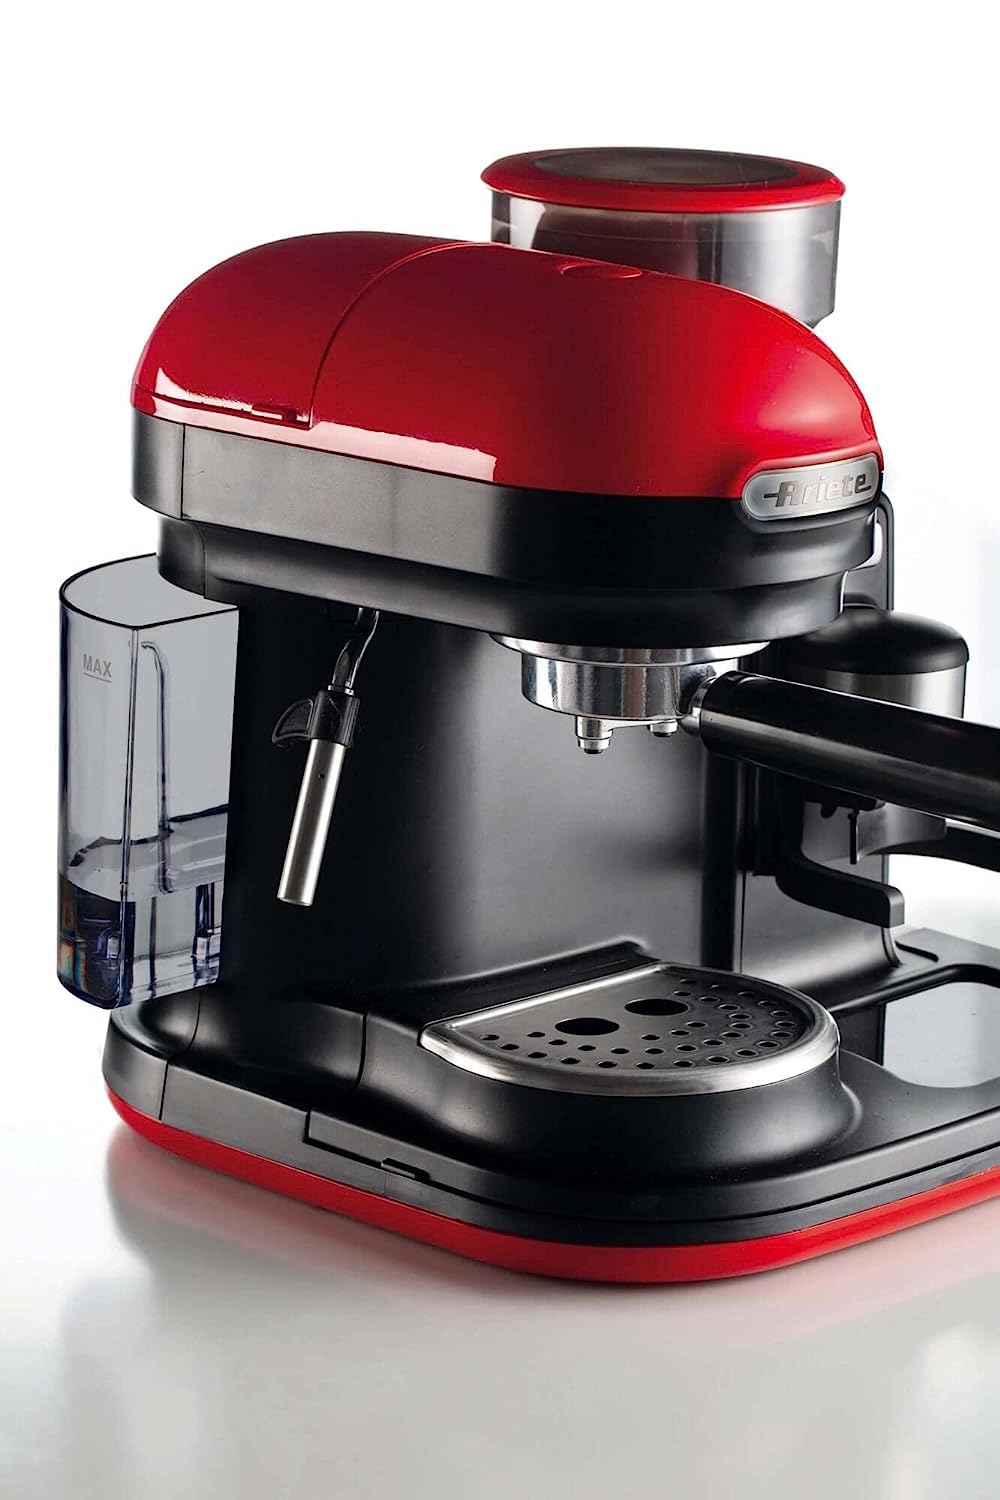 Ariete 1318 Espresso machine with integrated grinder Modern, For coffee  beans and powder, Cappuccinatore latte, Filter